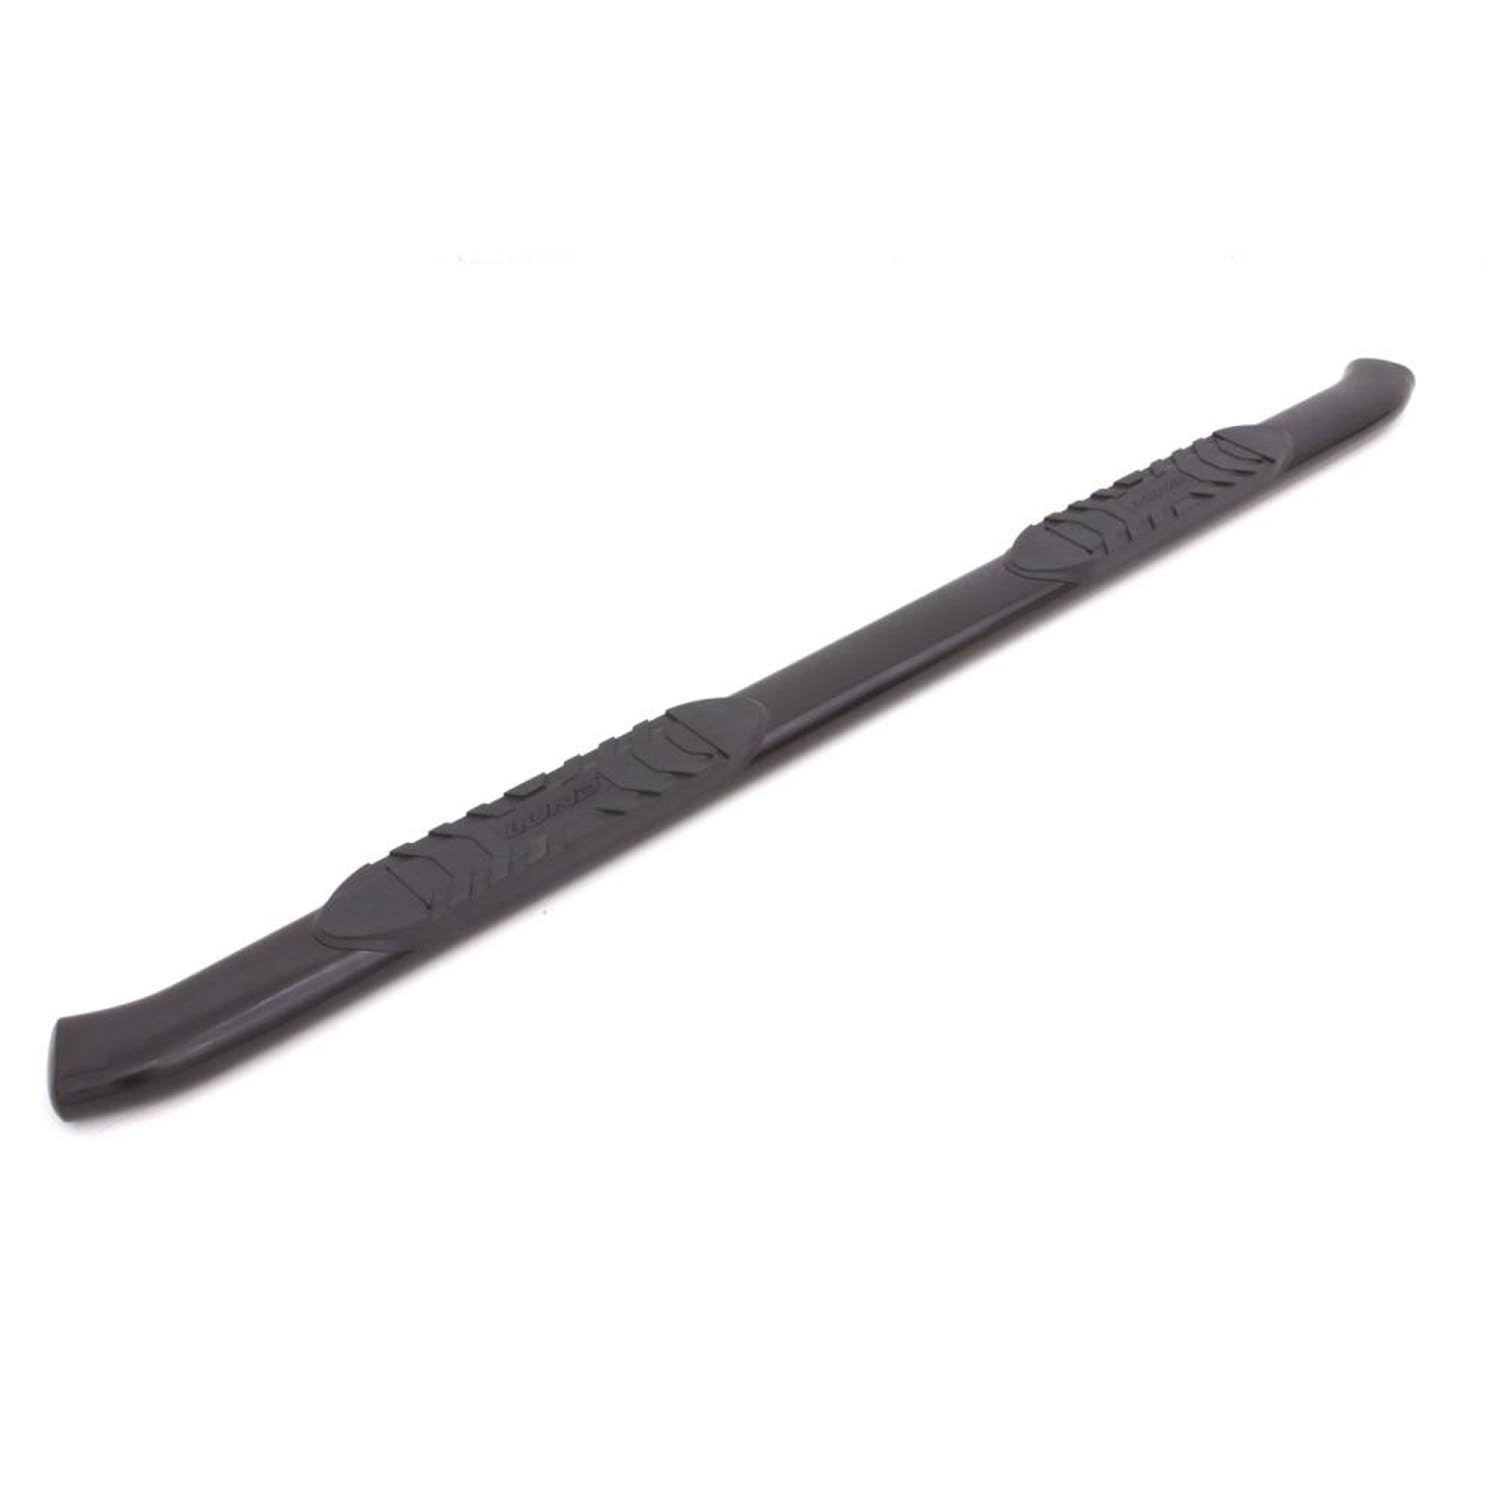 LUND 23440360 4 Inch Oval Curved Nerf Bar - Black 4 In OVAL CURVED STEEL